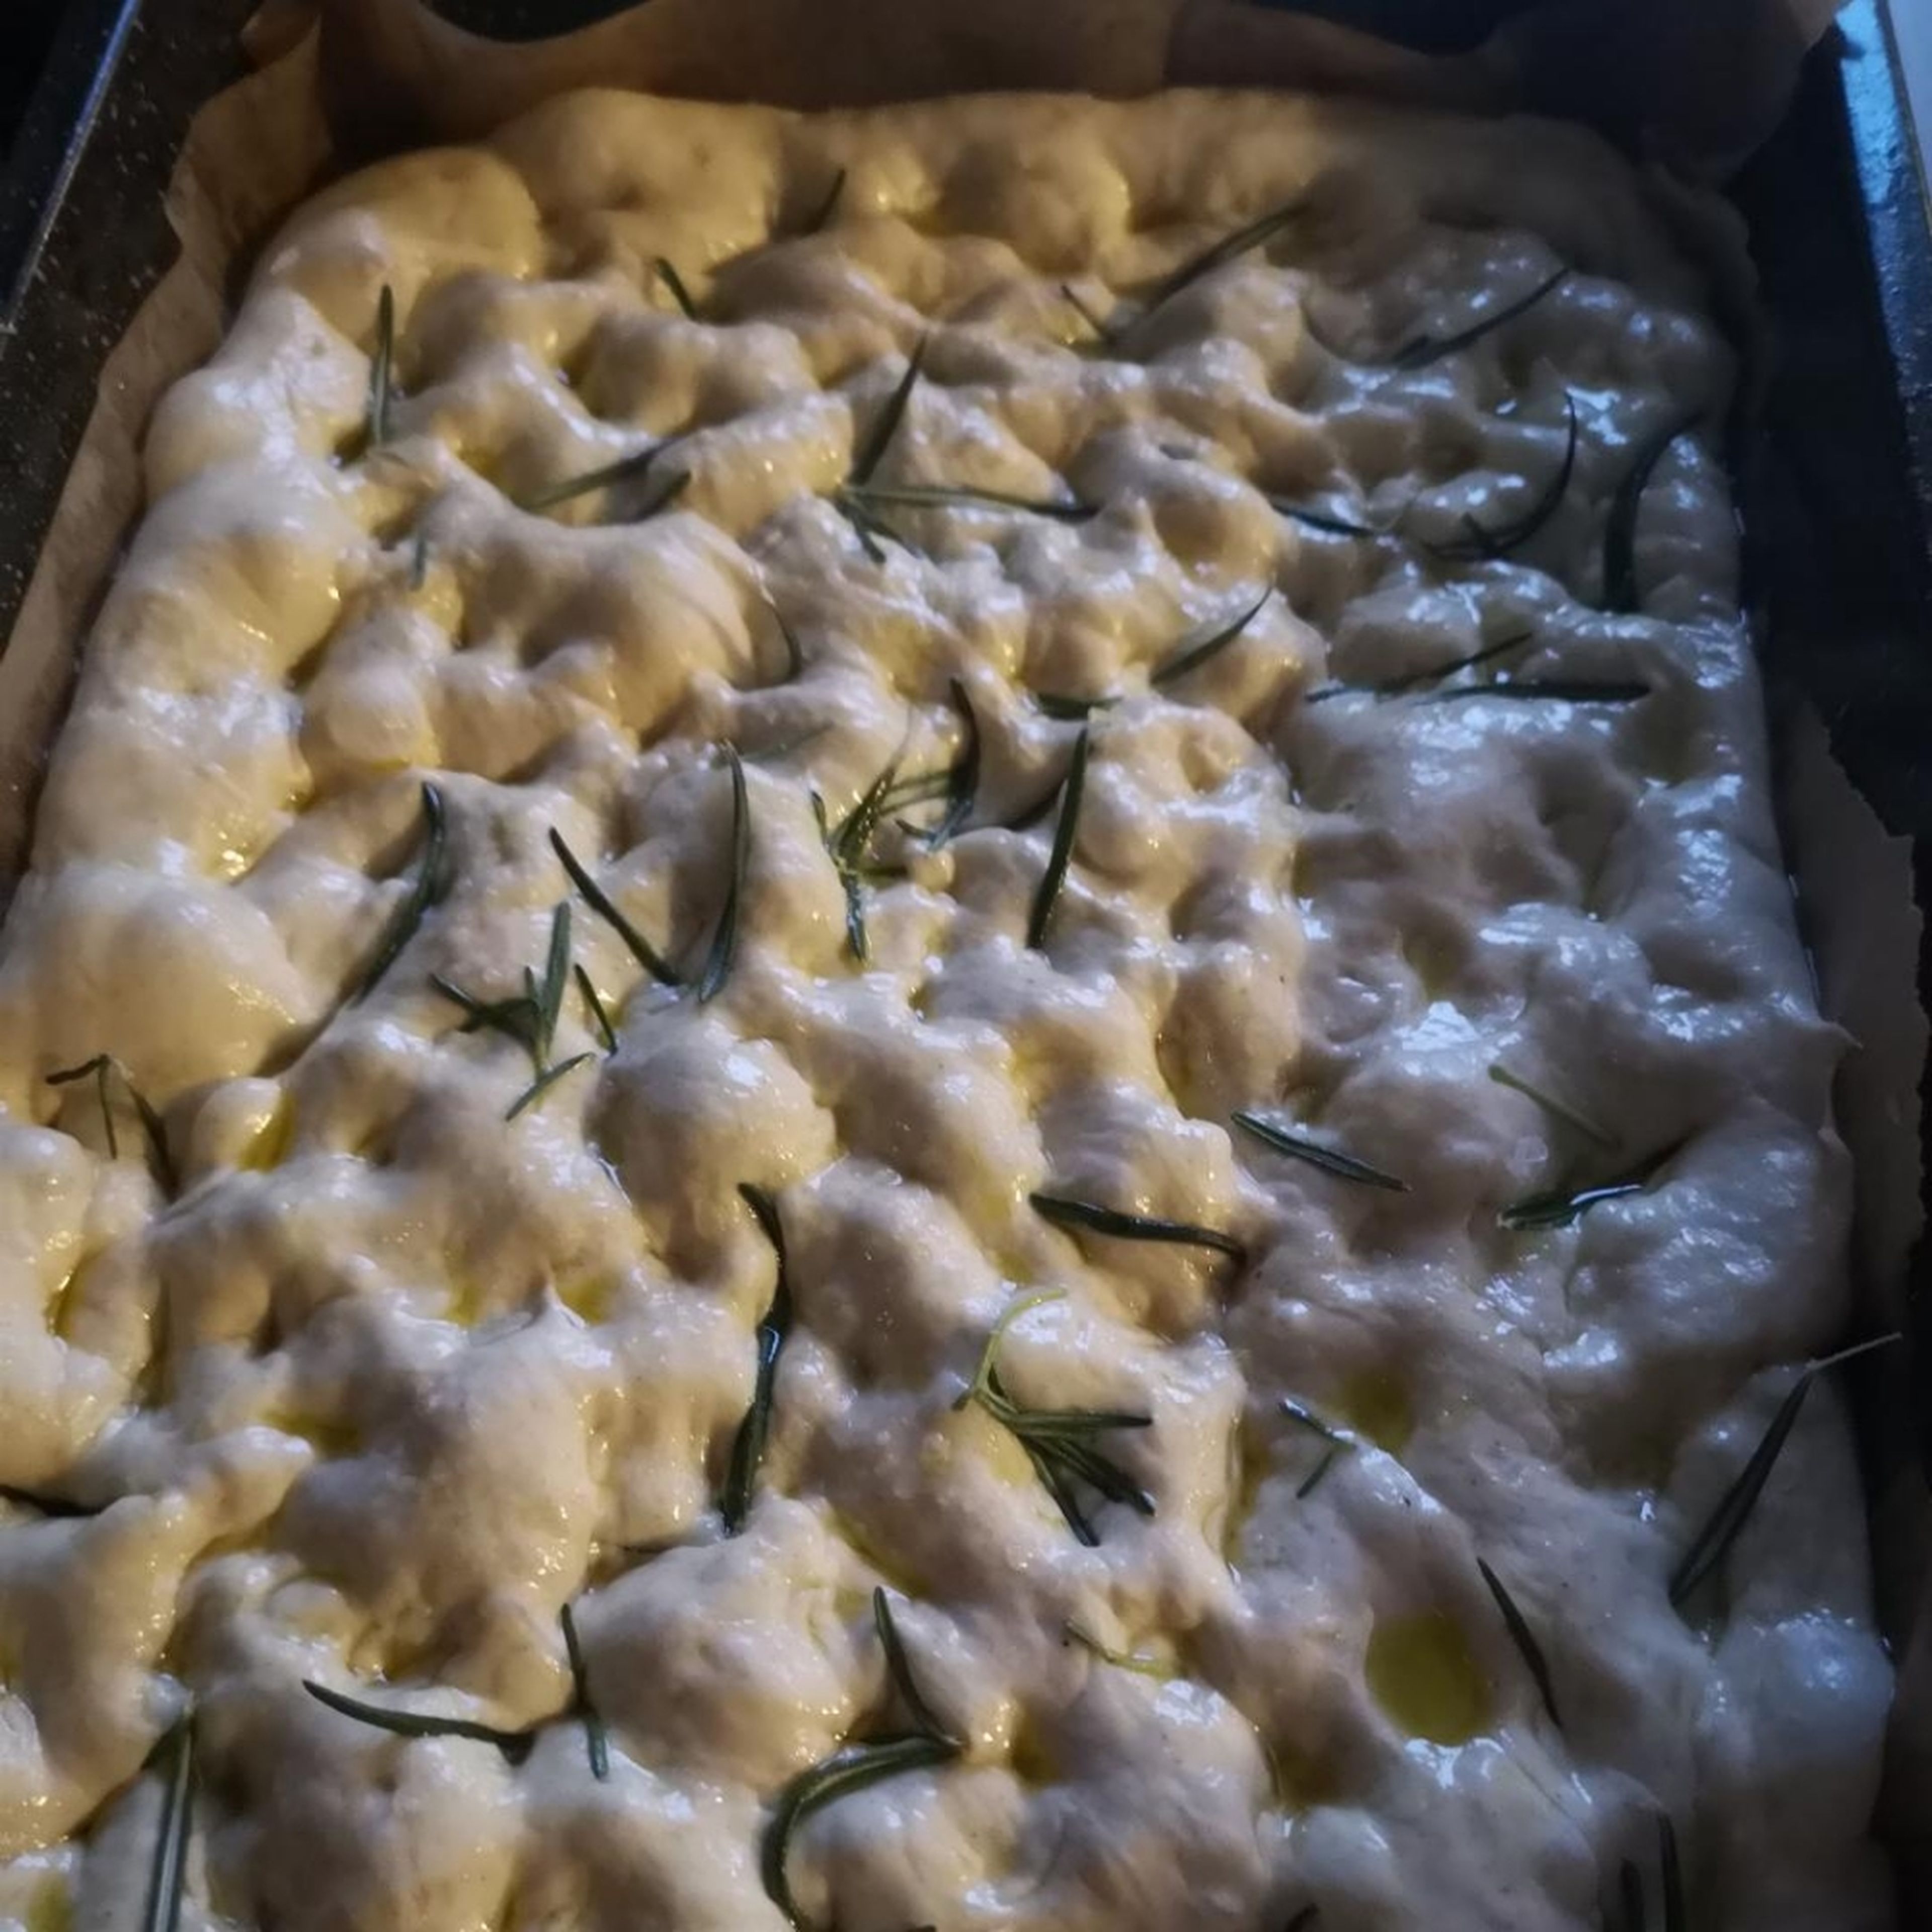 after 30 minimum of rest, the dough should have risen a little more, once more using your fingertips create craters in the surface of the dough, drizzle over the remaining olive oil, sprinkle the fresh rosemary and salt as desired. (If you have access to Maldon salt, this is a recipe for it to shine!)